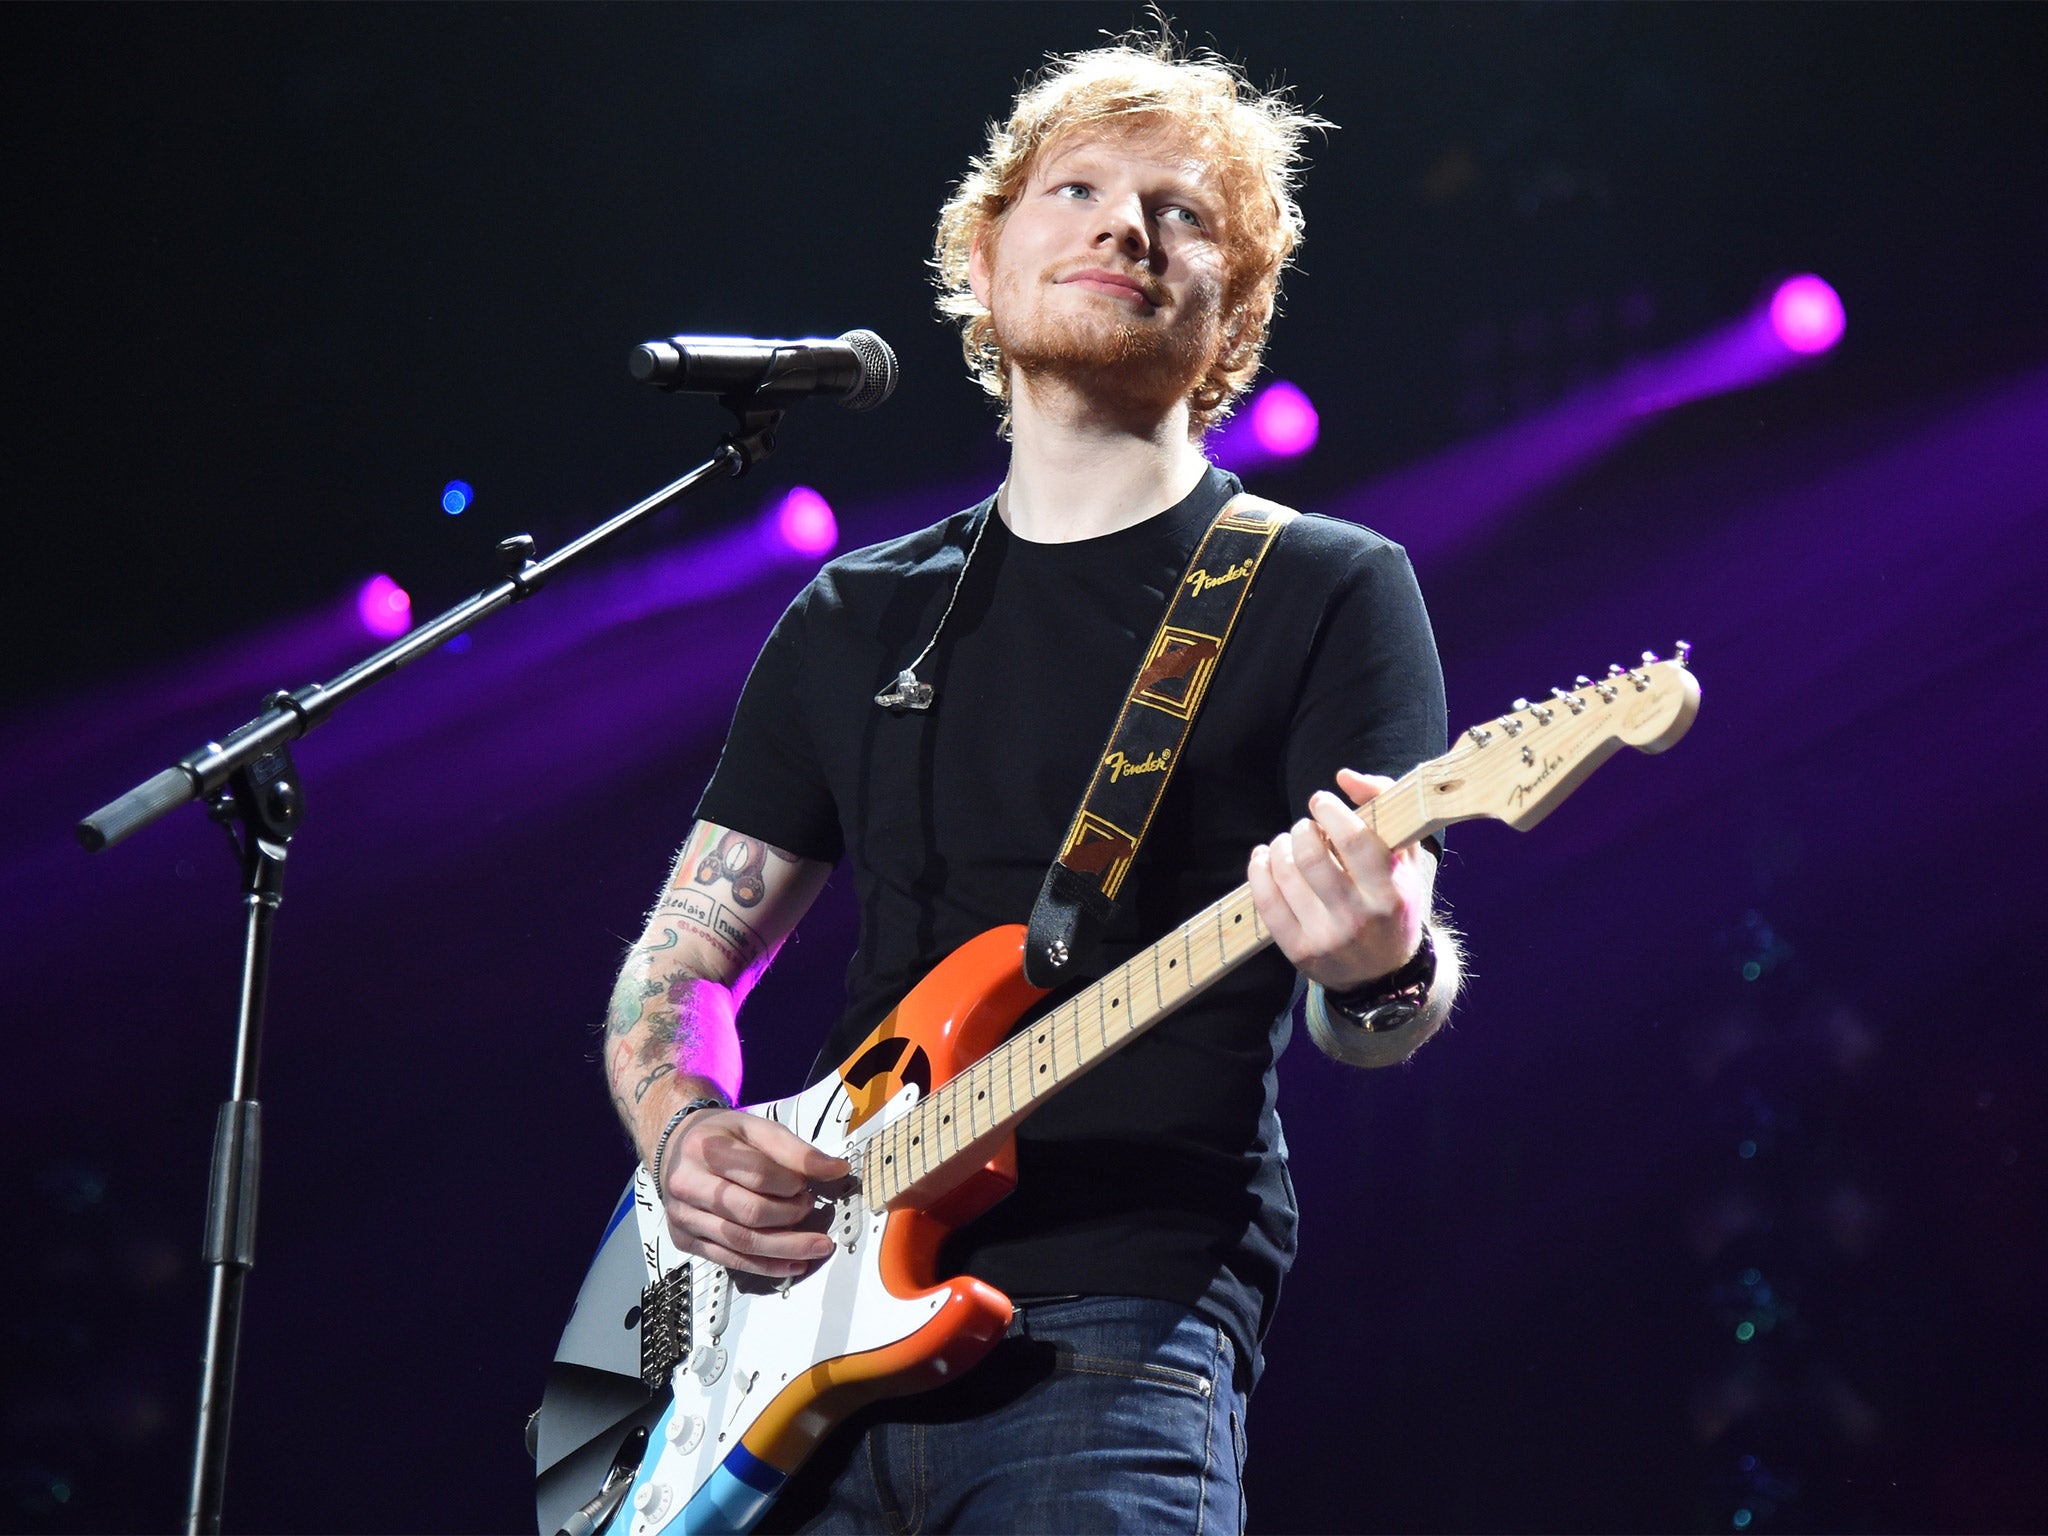 Ed Sheeran topped the album sales chart for 2014